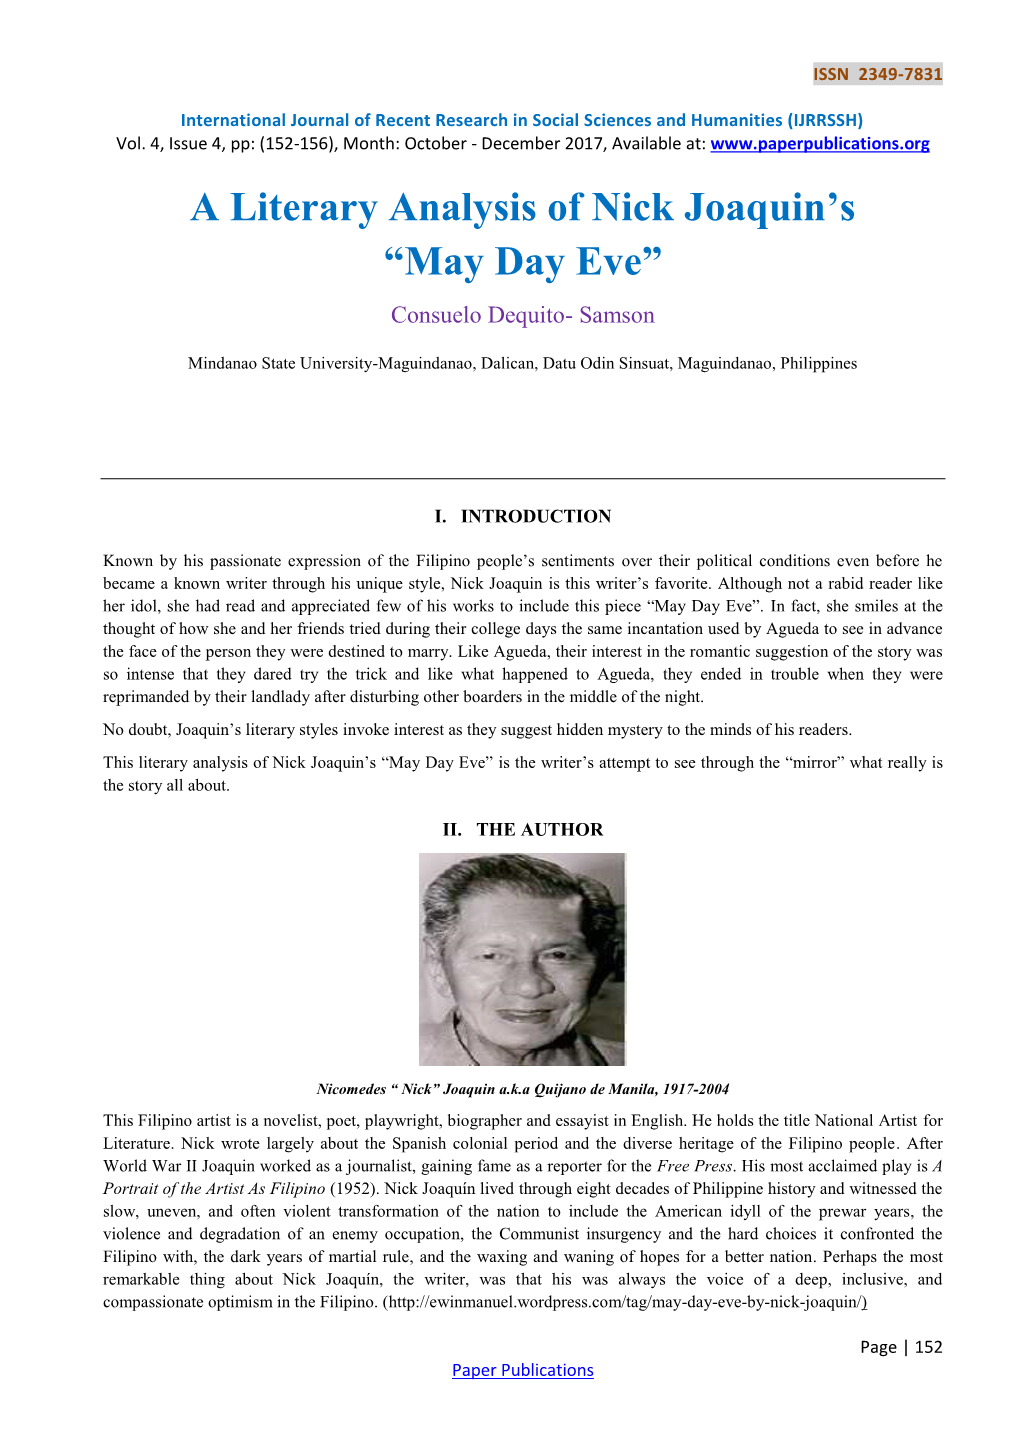 A Literary Analysis of Nick Joaquin's “May Day Eve”